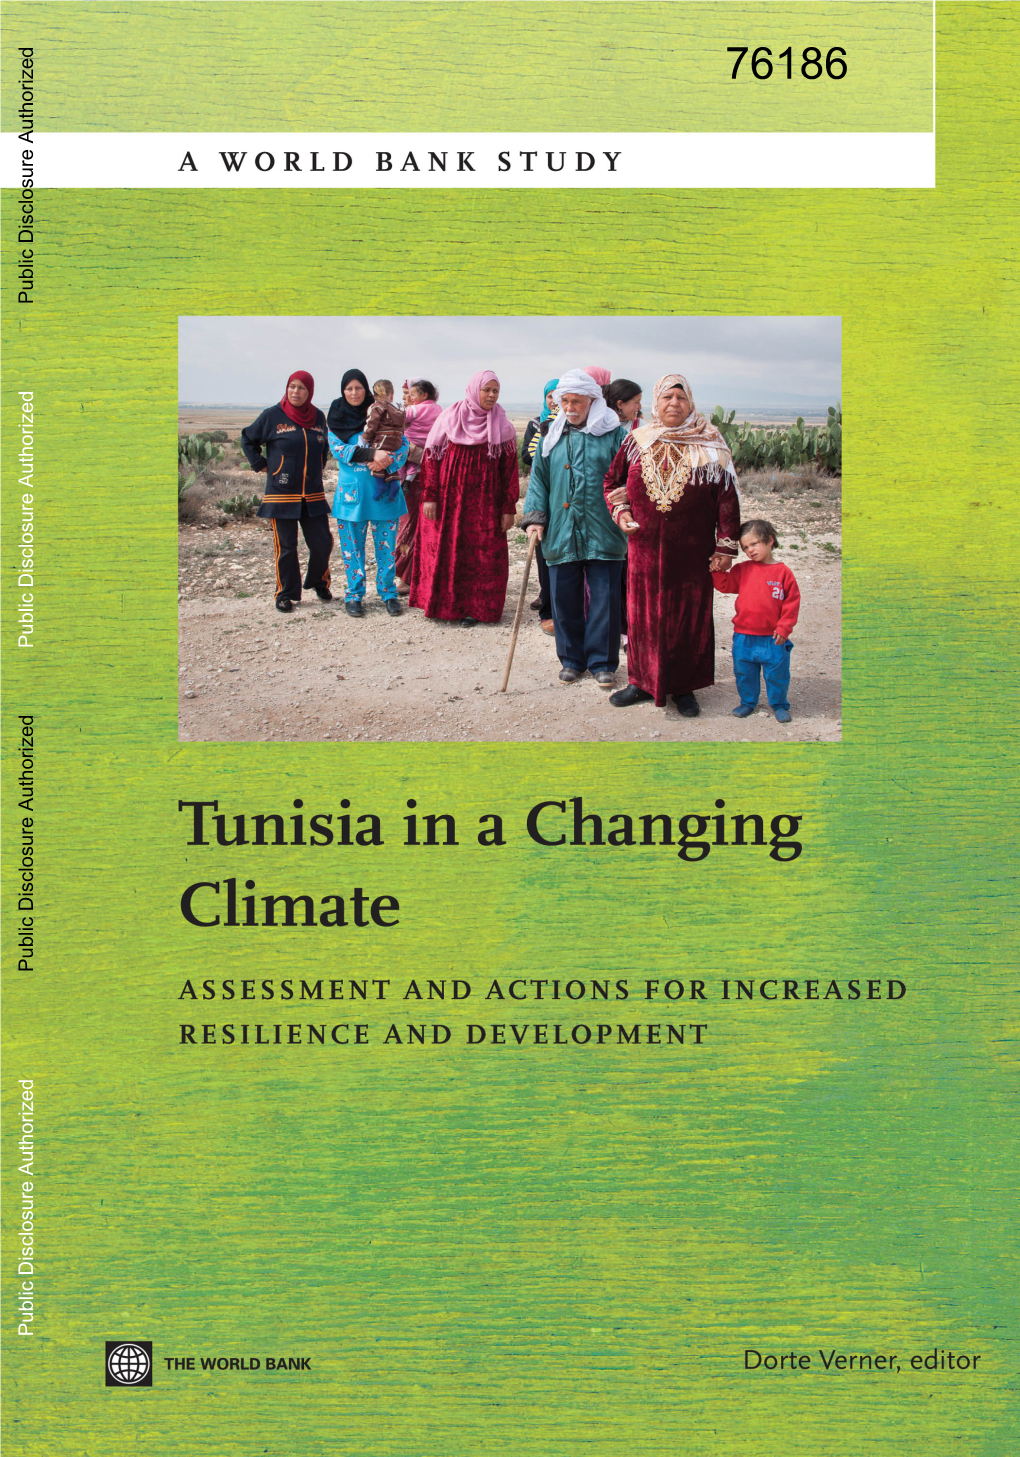 Tunisia in a Changing Climate Assessment and Actions for Increased Resilience and Development